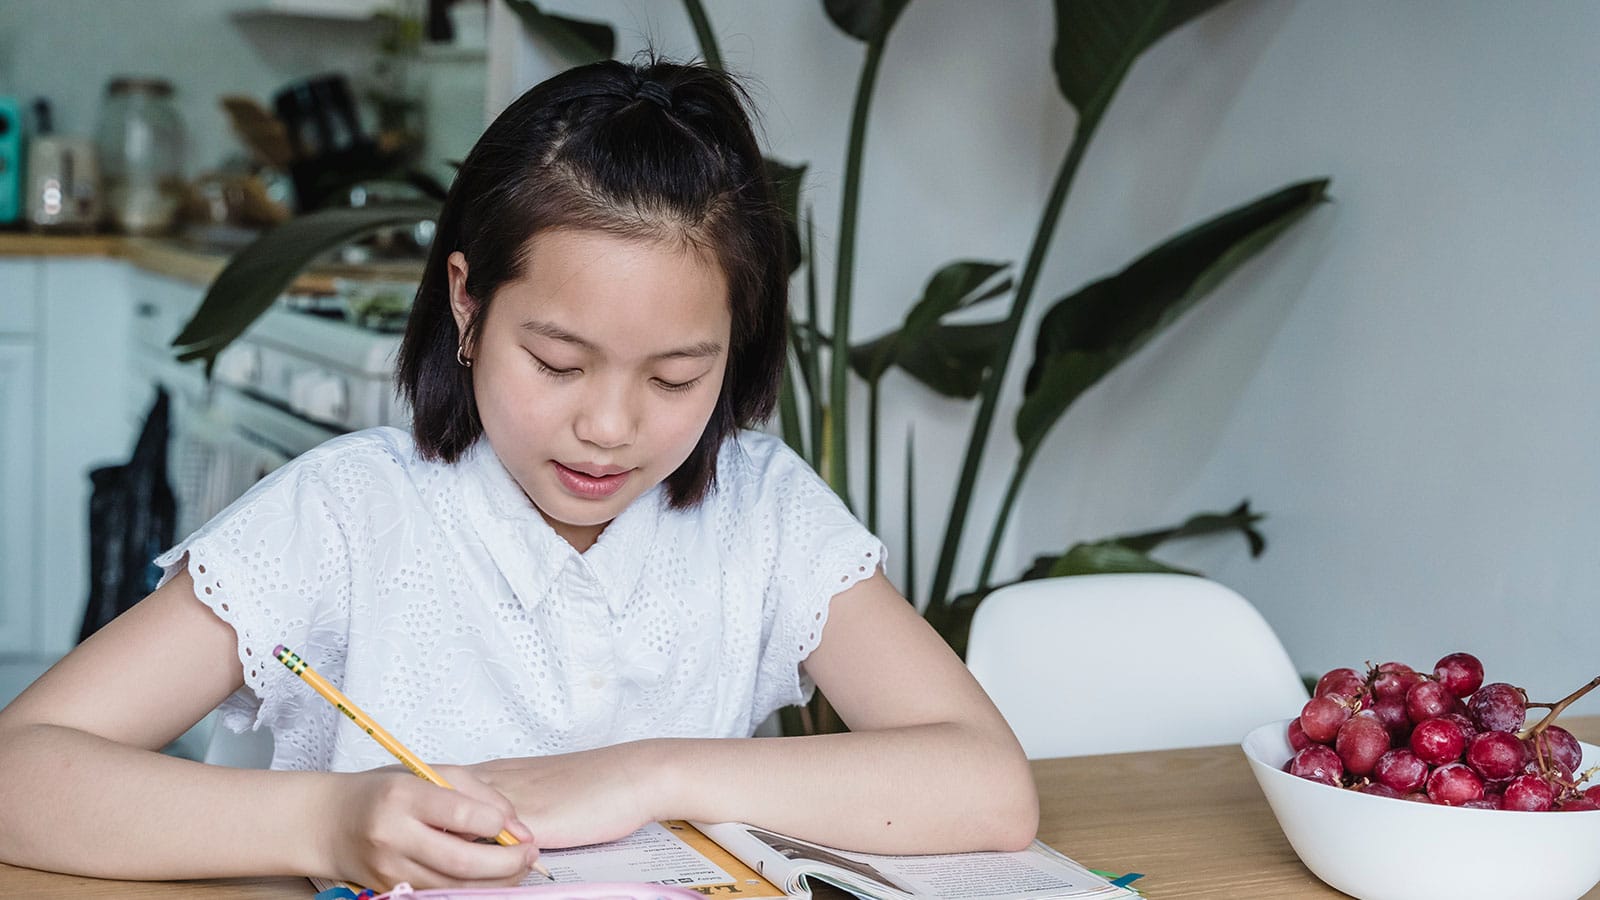 A Girl in White Top Writing on a Notebook